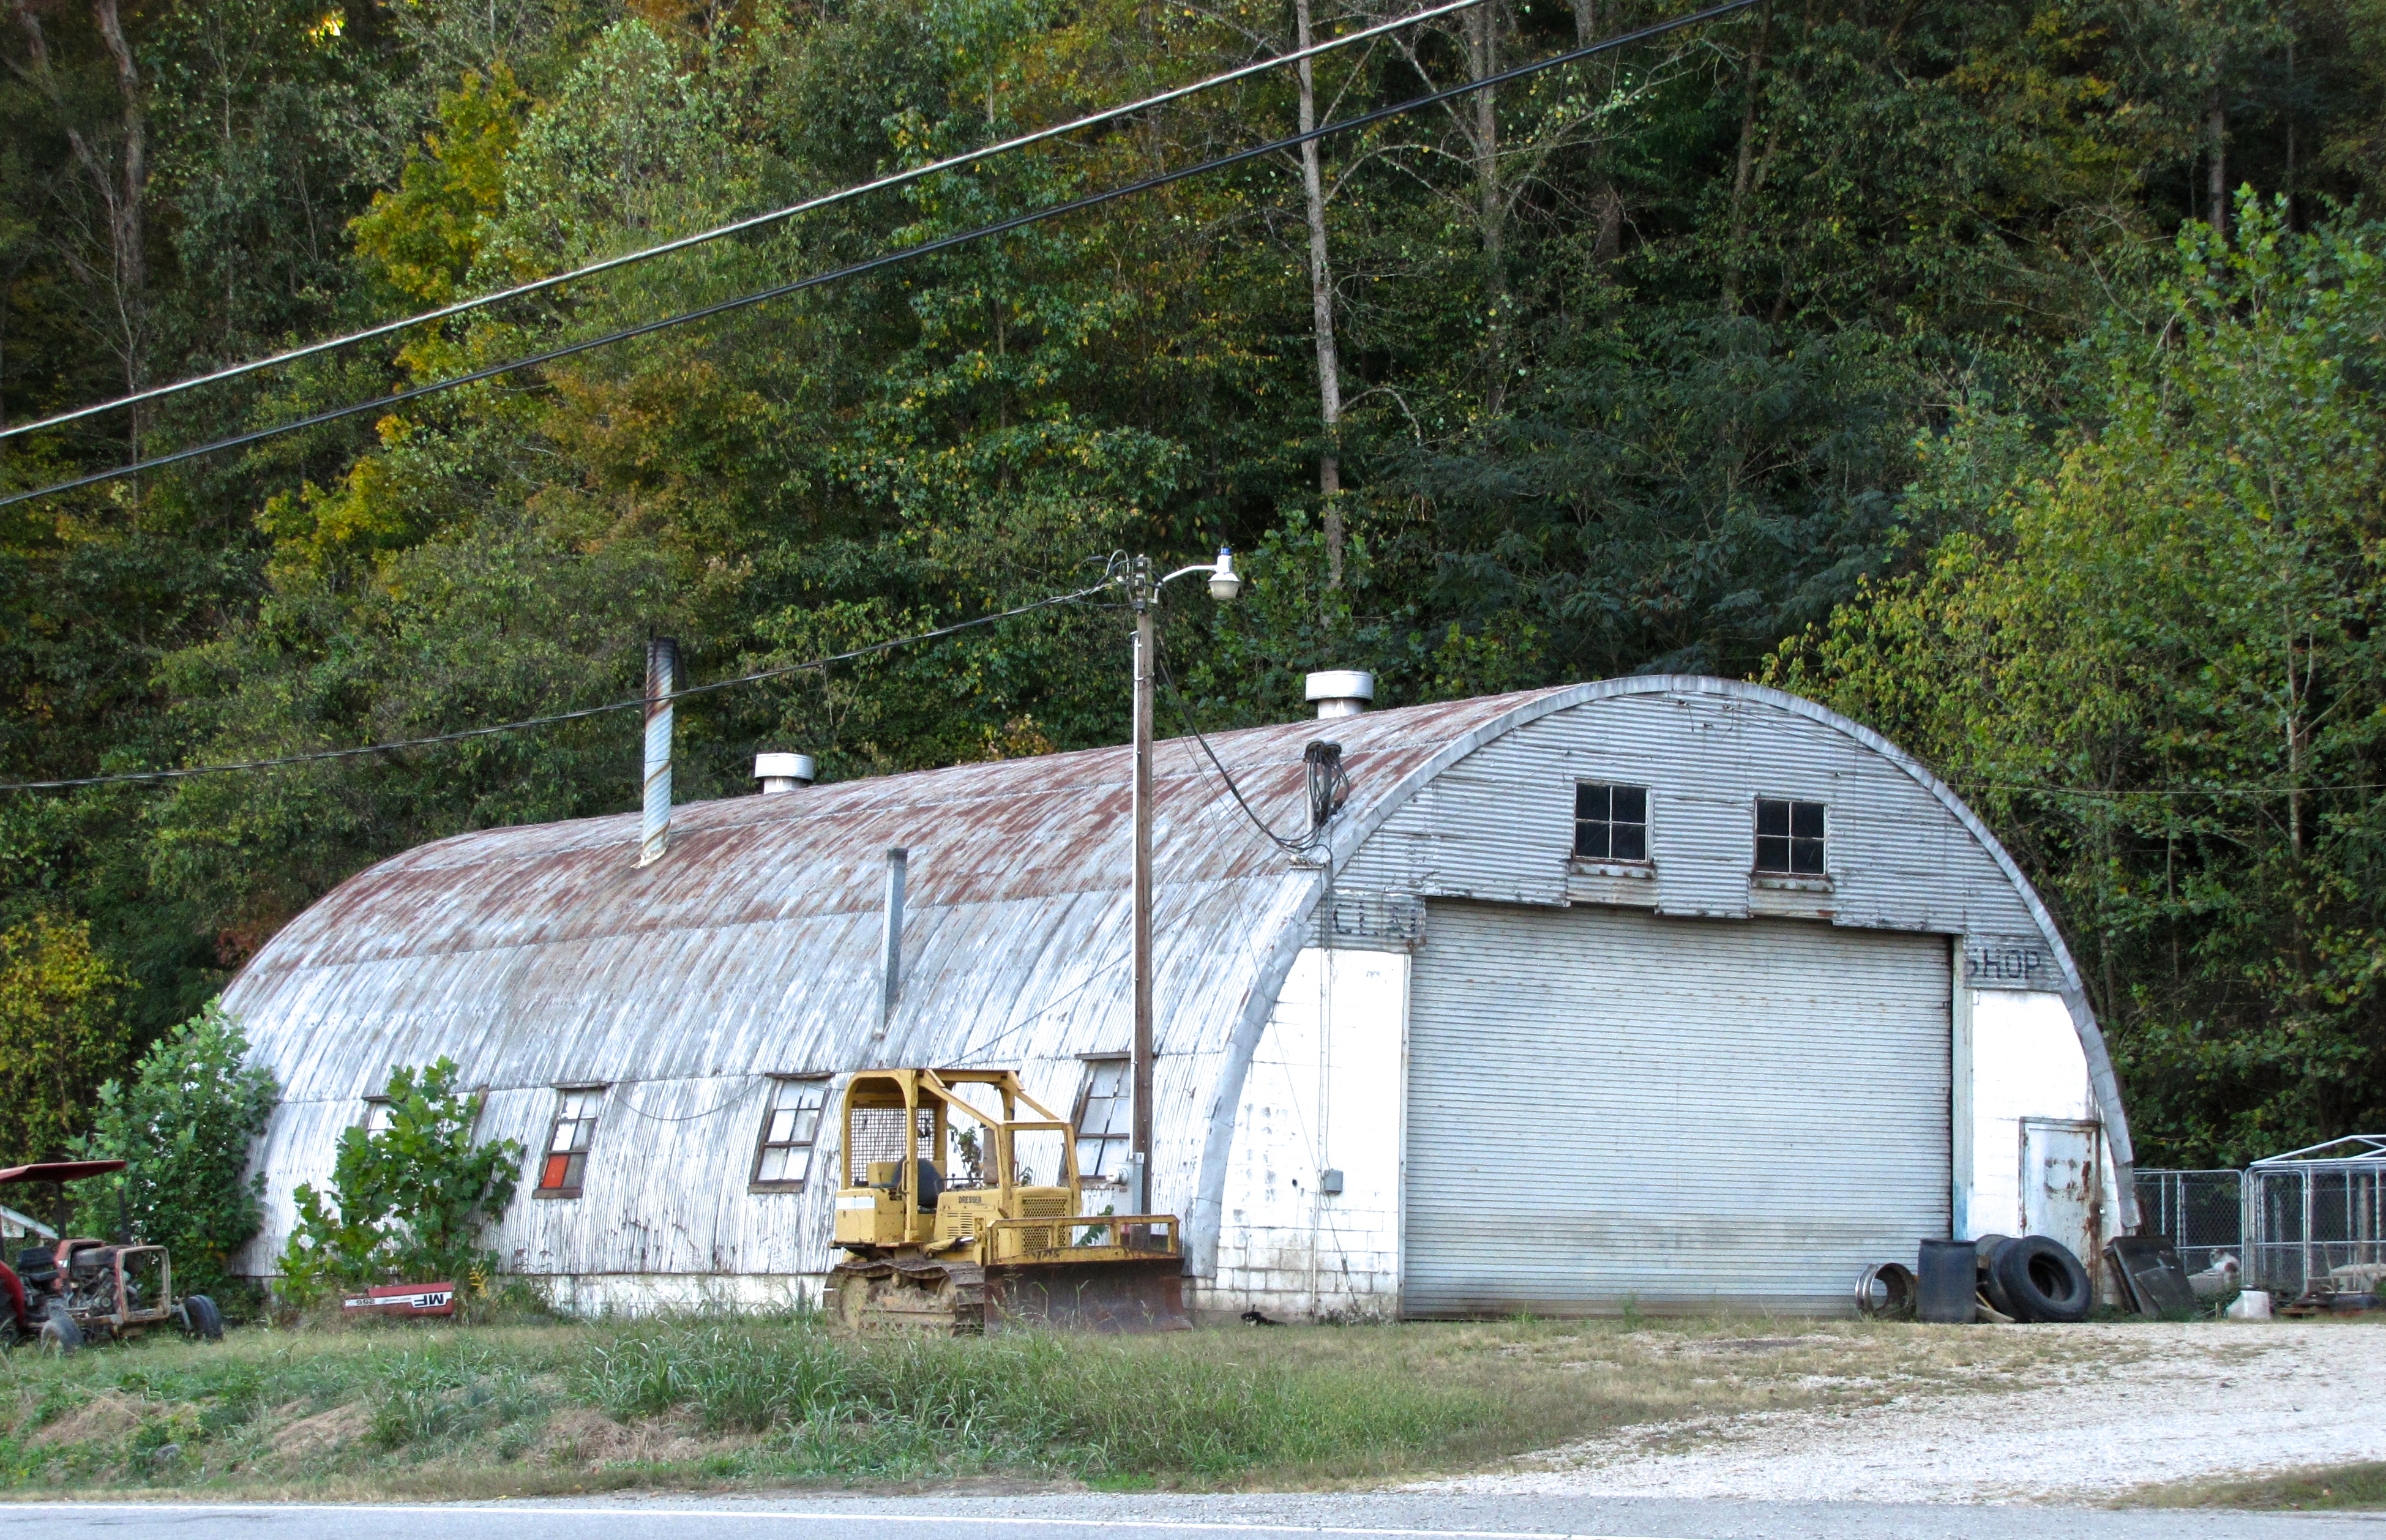 quonset hut in Privacy Policy, NC